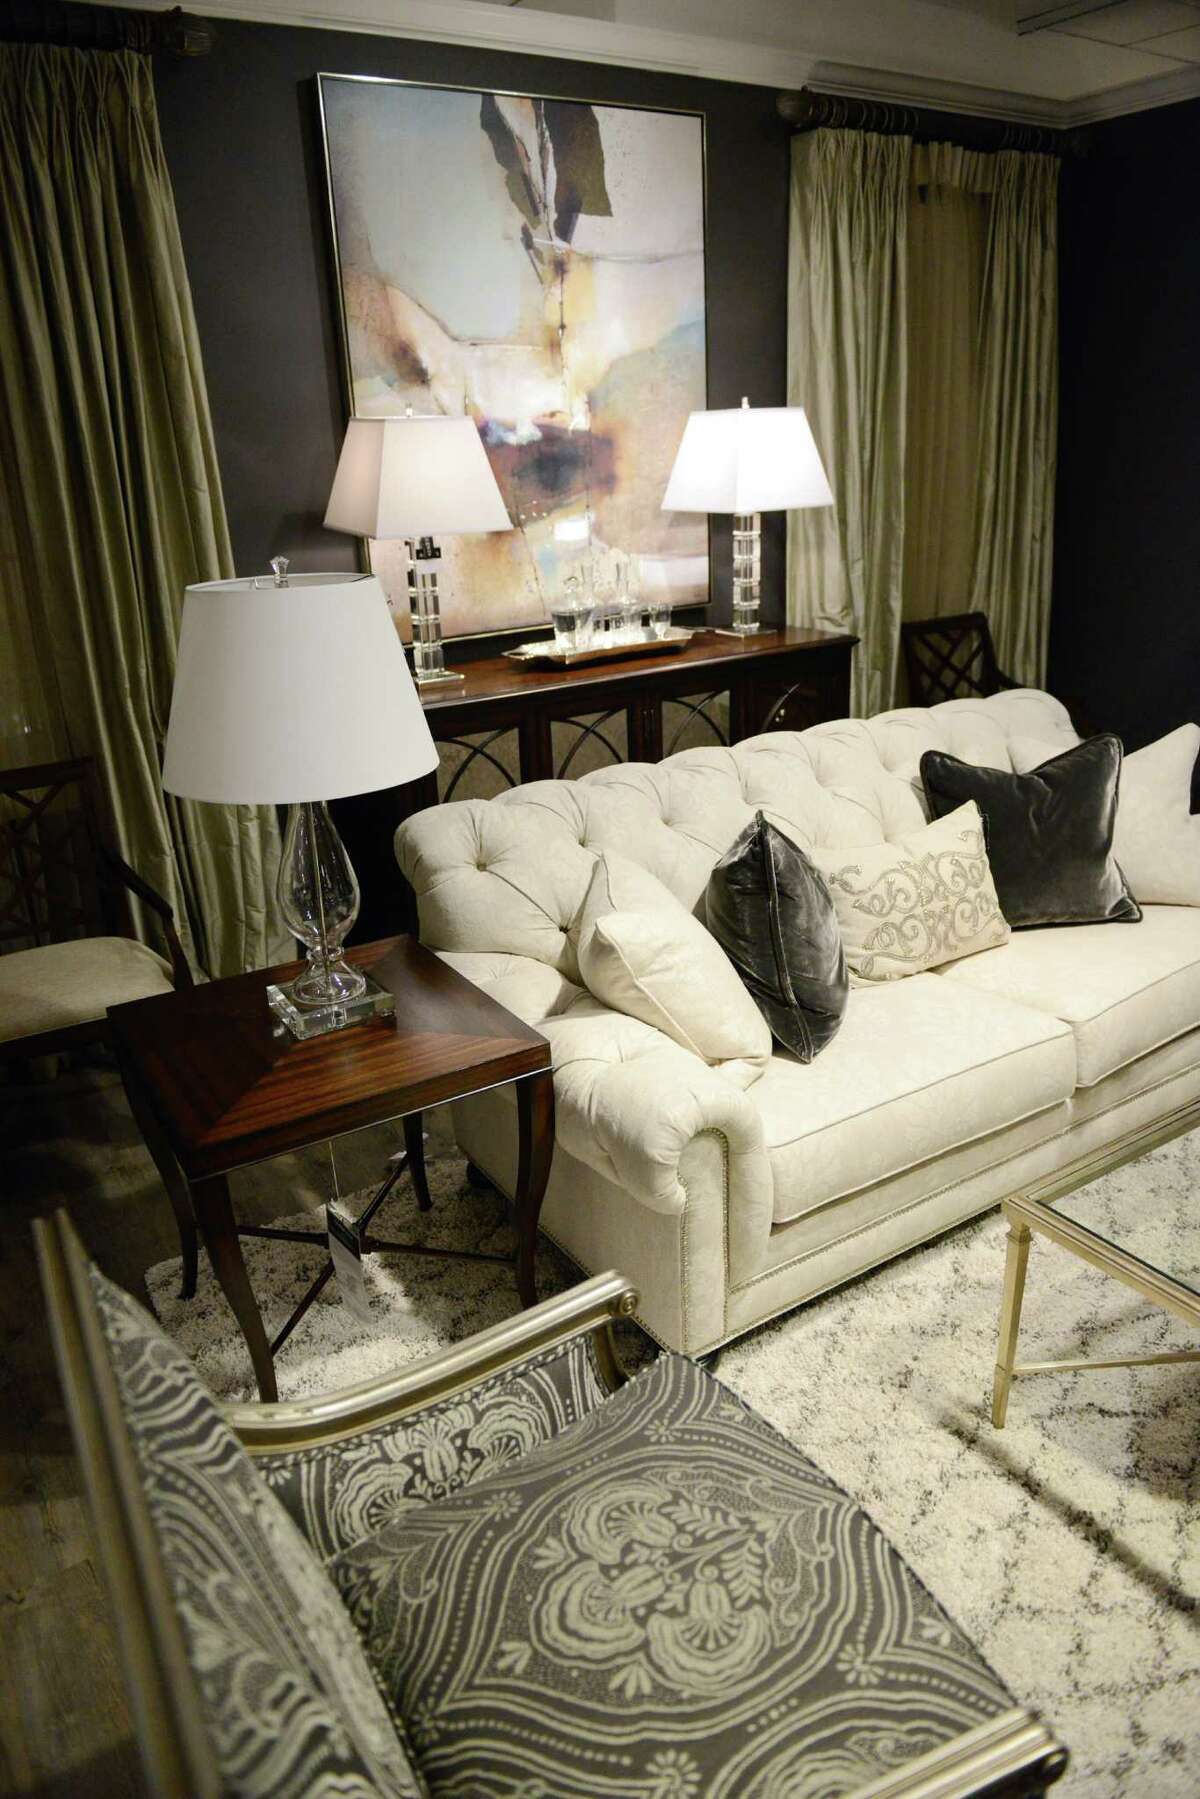 This living room setup combines a contemporary artwork and modern lamps with a traditional button-tufted sofa and contemporary fabric on a traditional chair at the unveiling of Ethan Allen's "New Eclecticism" at the Ethan Allen Design Center in Danbury, Conn. on Thursday, Oct. 17, 2013. The New Eclecticism combines modern with traditional interior design qualities, including a variety of colors and textures in the design.